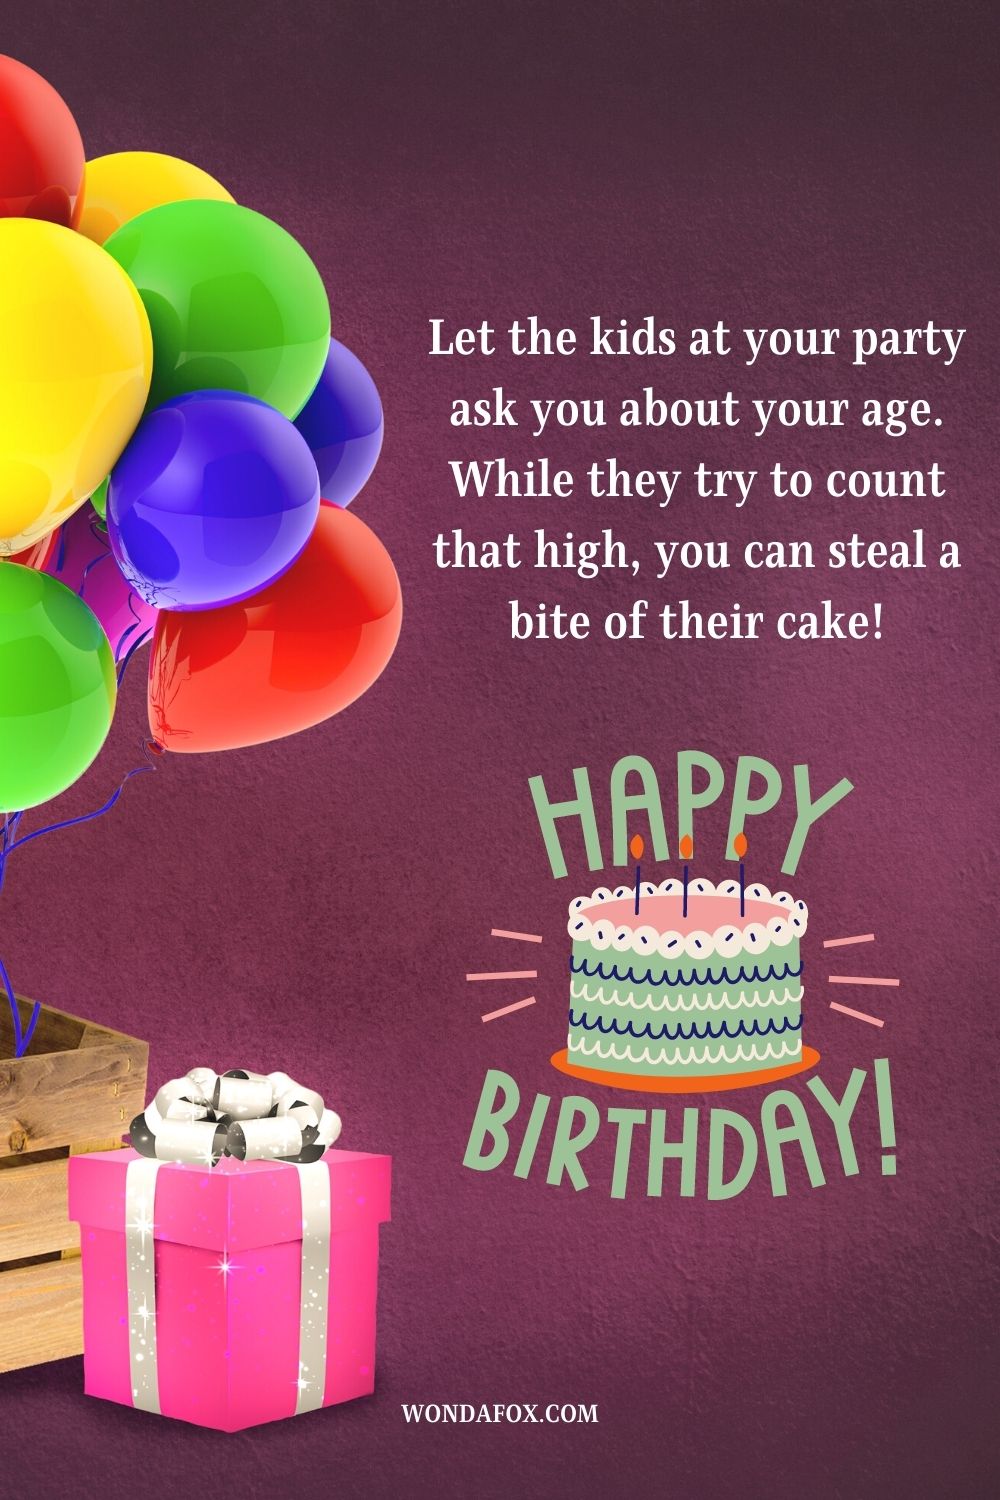 Let the kids at your party ask you about your age. While they try to count that high, you can steal a bite of their cake! Happy Birthday.